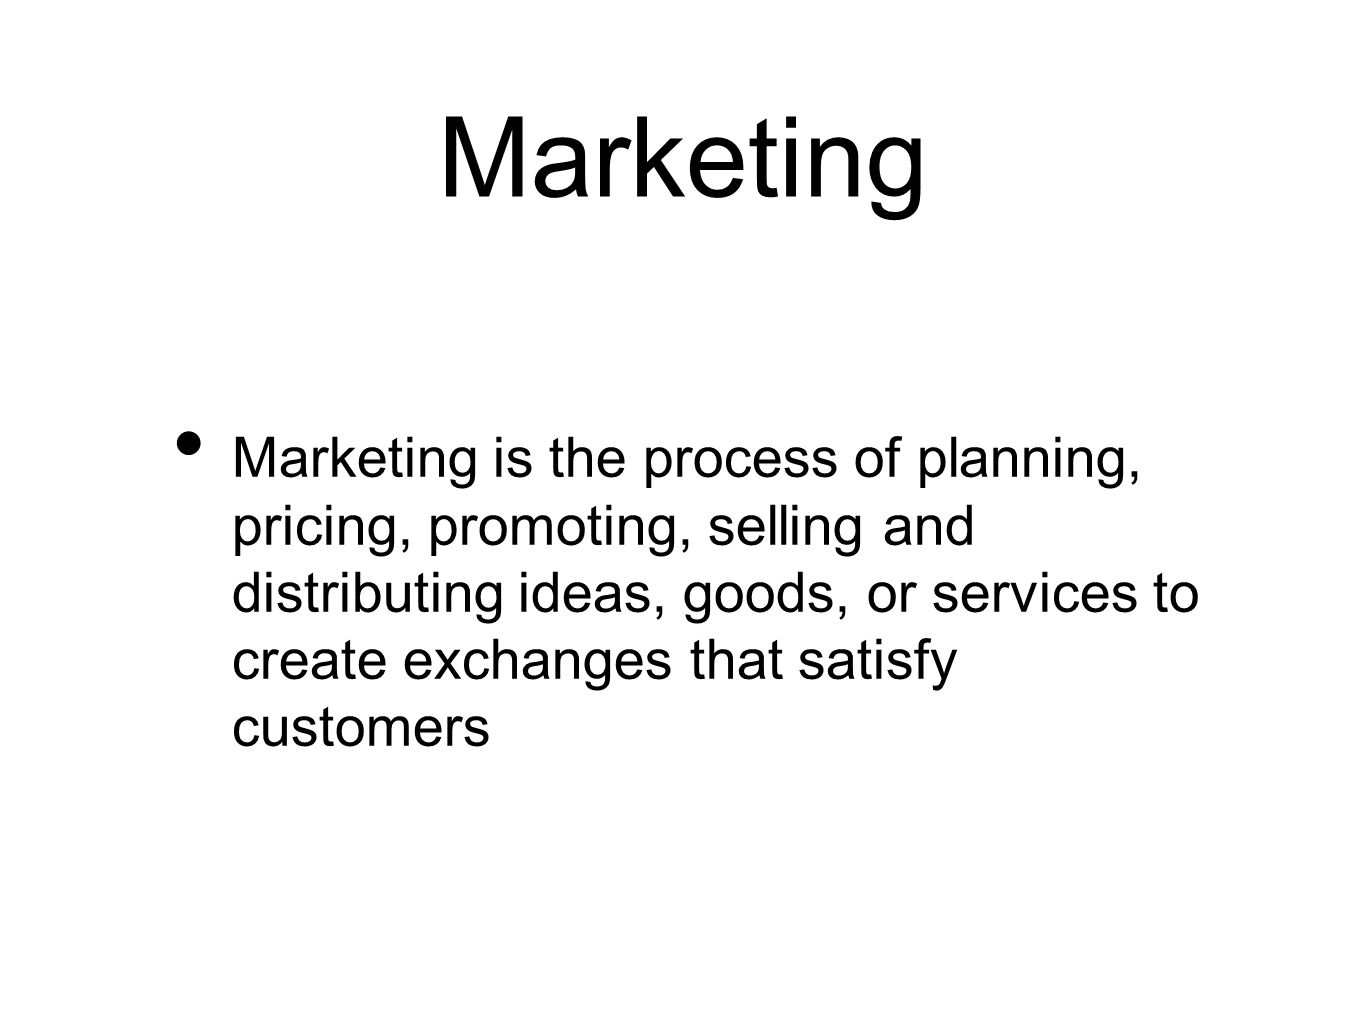 Marketing Marketing is the process of planning, pricing, promoting, selling and distributing ideas, goods, or services to create exchanges that satisfy customers